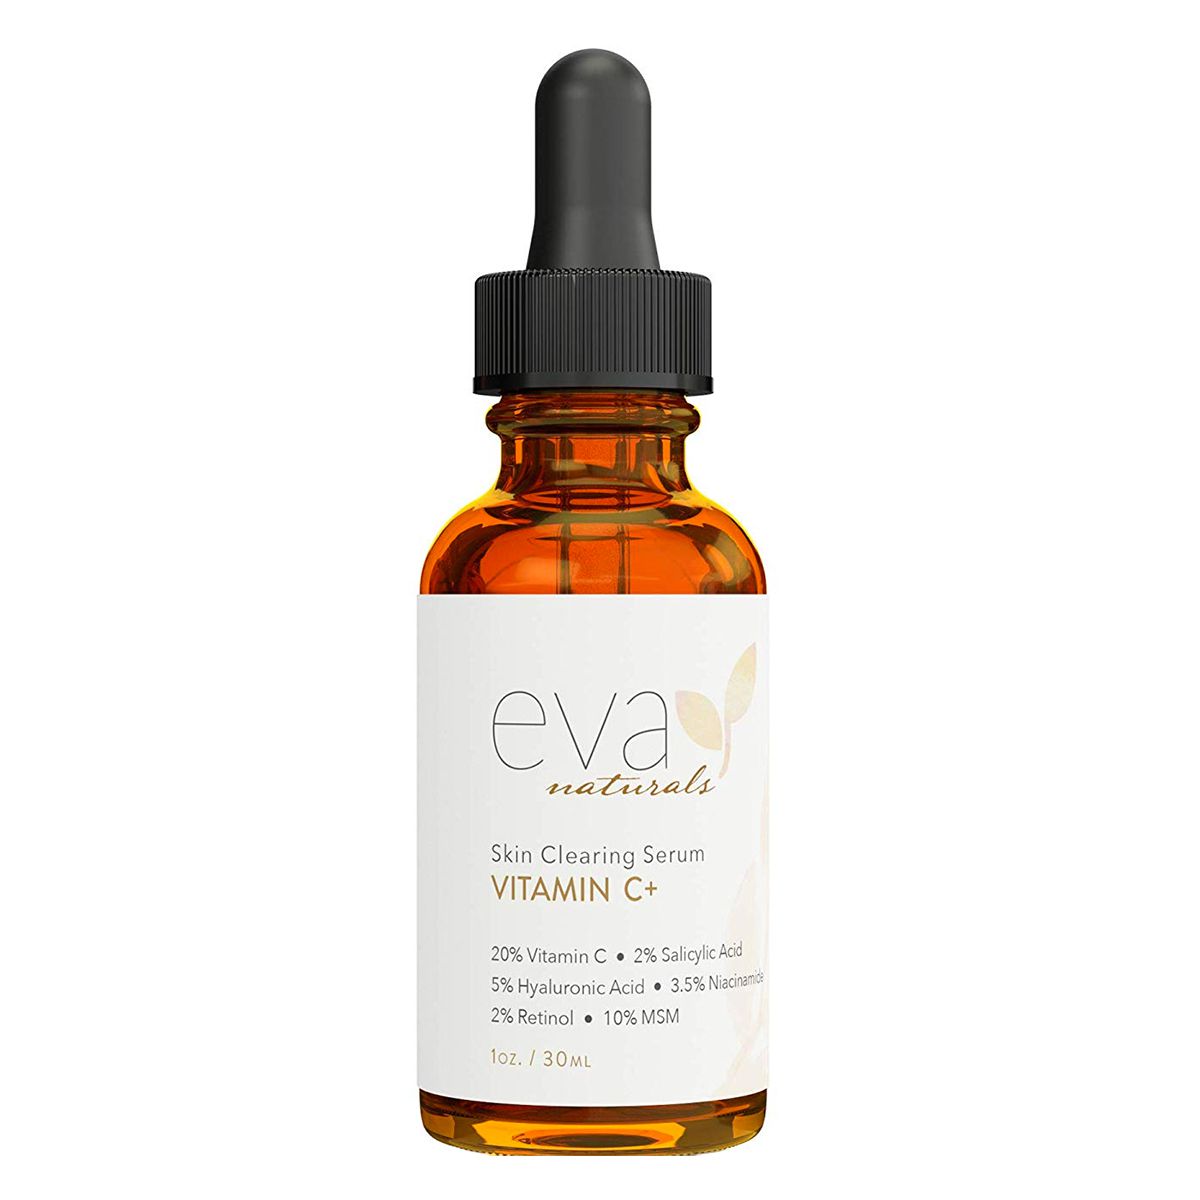 Best Anti-Aging Products for Wrinkles: Eva Naturals Skin Clearing Serum with Vitamin C, Hyaluronic Acid, Retinol, and Niacinamide